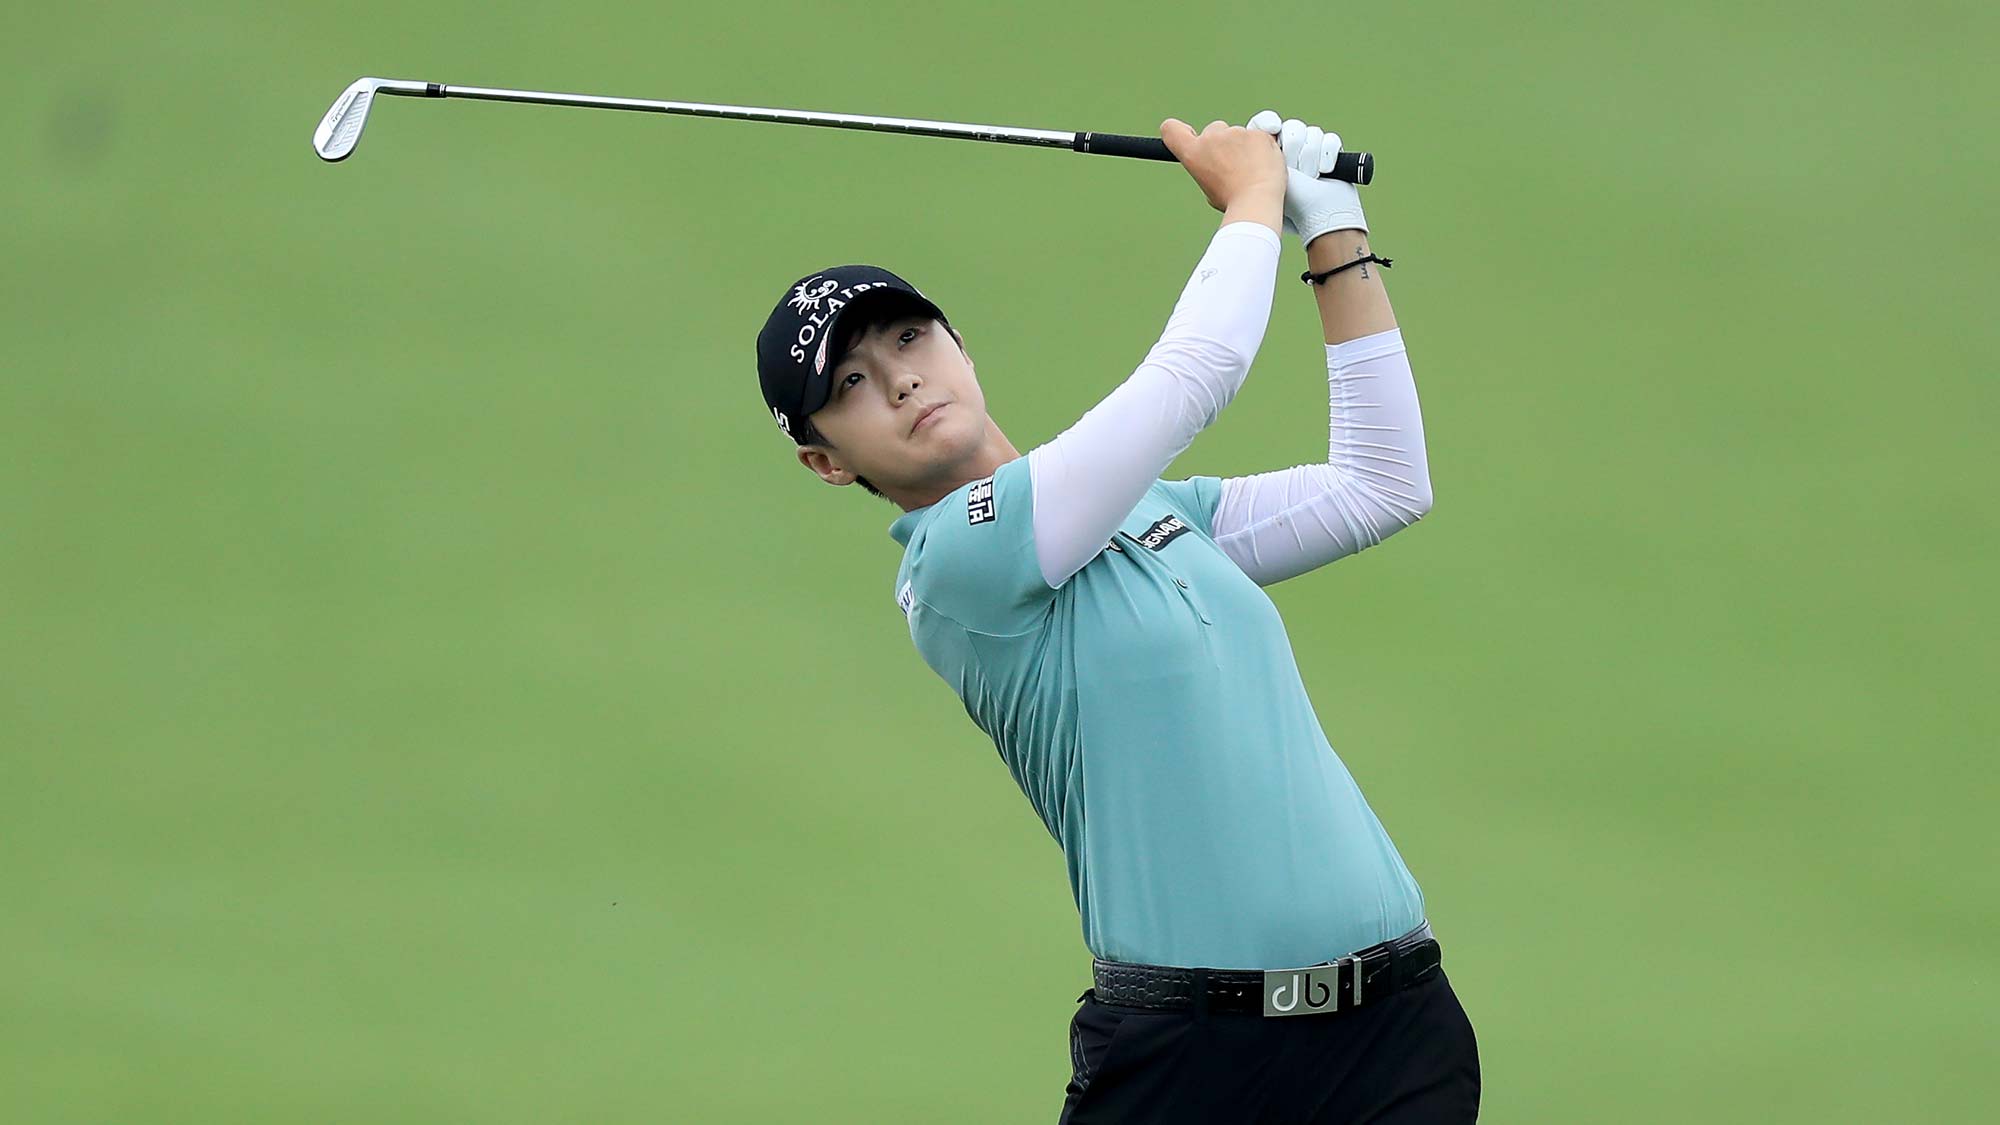 Sung Hyun Park of South Korea plays her second shot on the par 4, second hole during the final round of the 2019 KPMG Women's PGA Championship